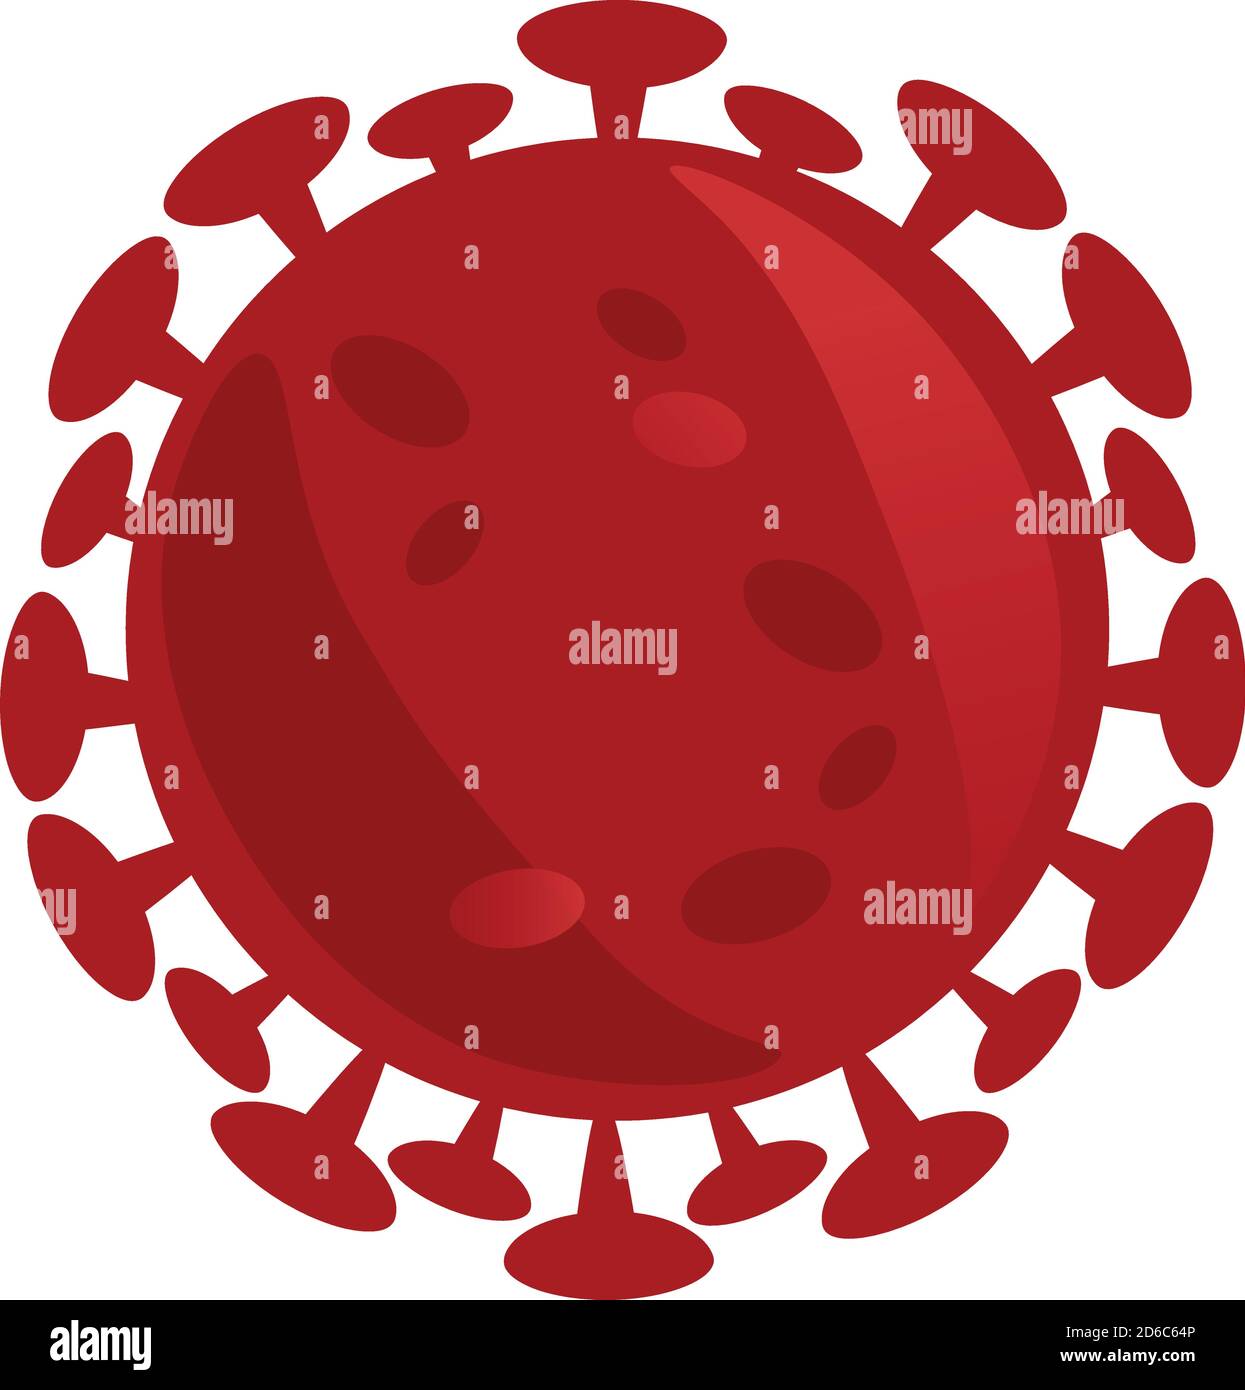 icon of isolated red microscopic cell of coronavirus - SARS-CoV-2 bacteria. Stock Vector